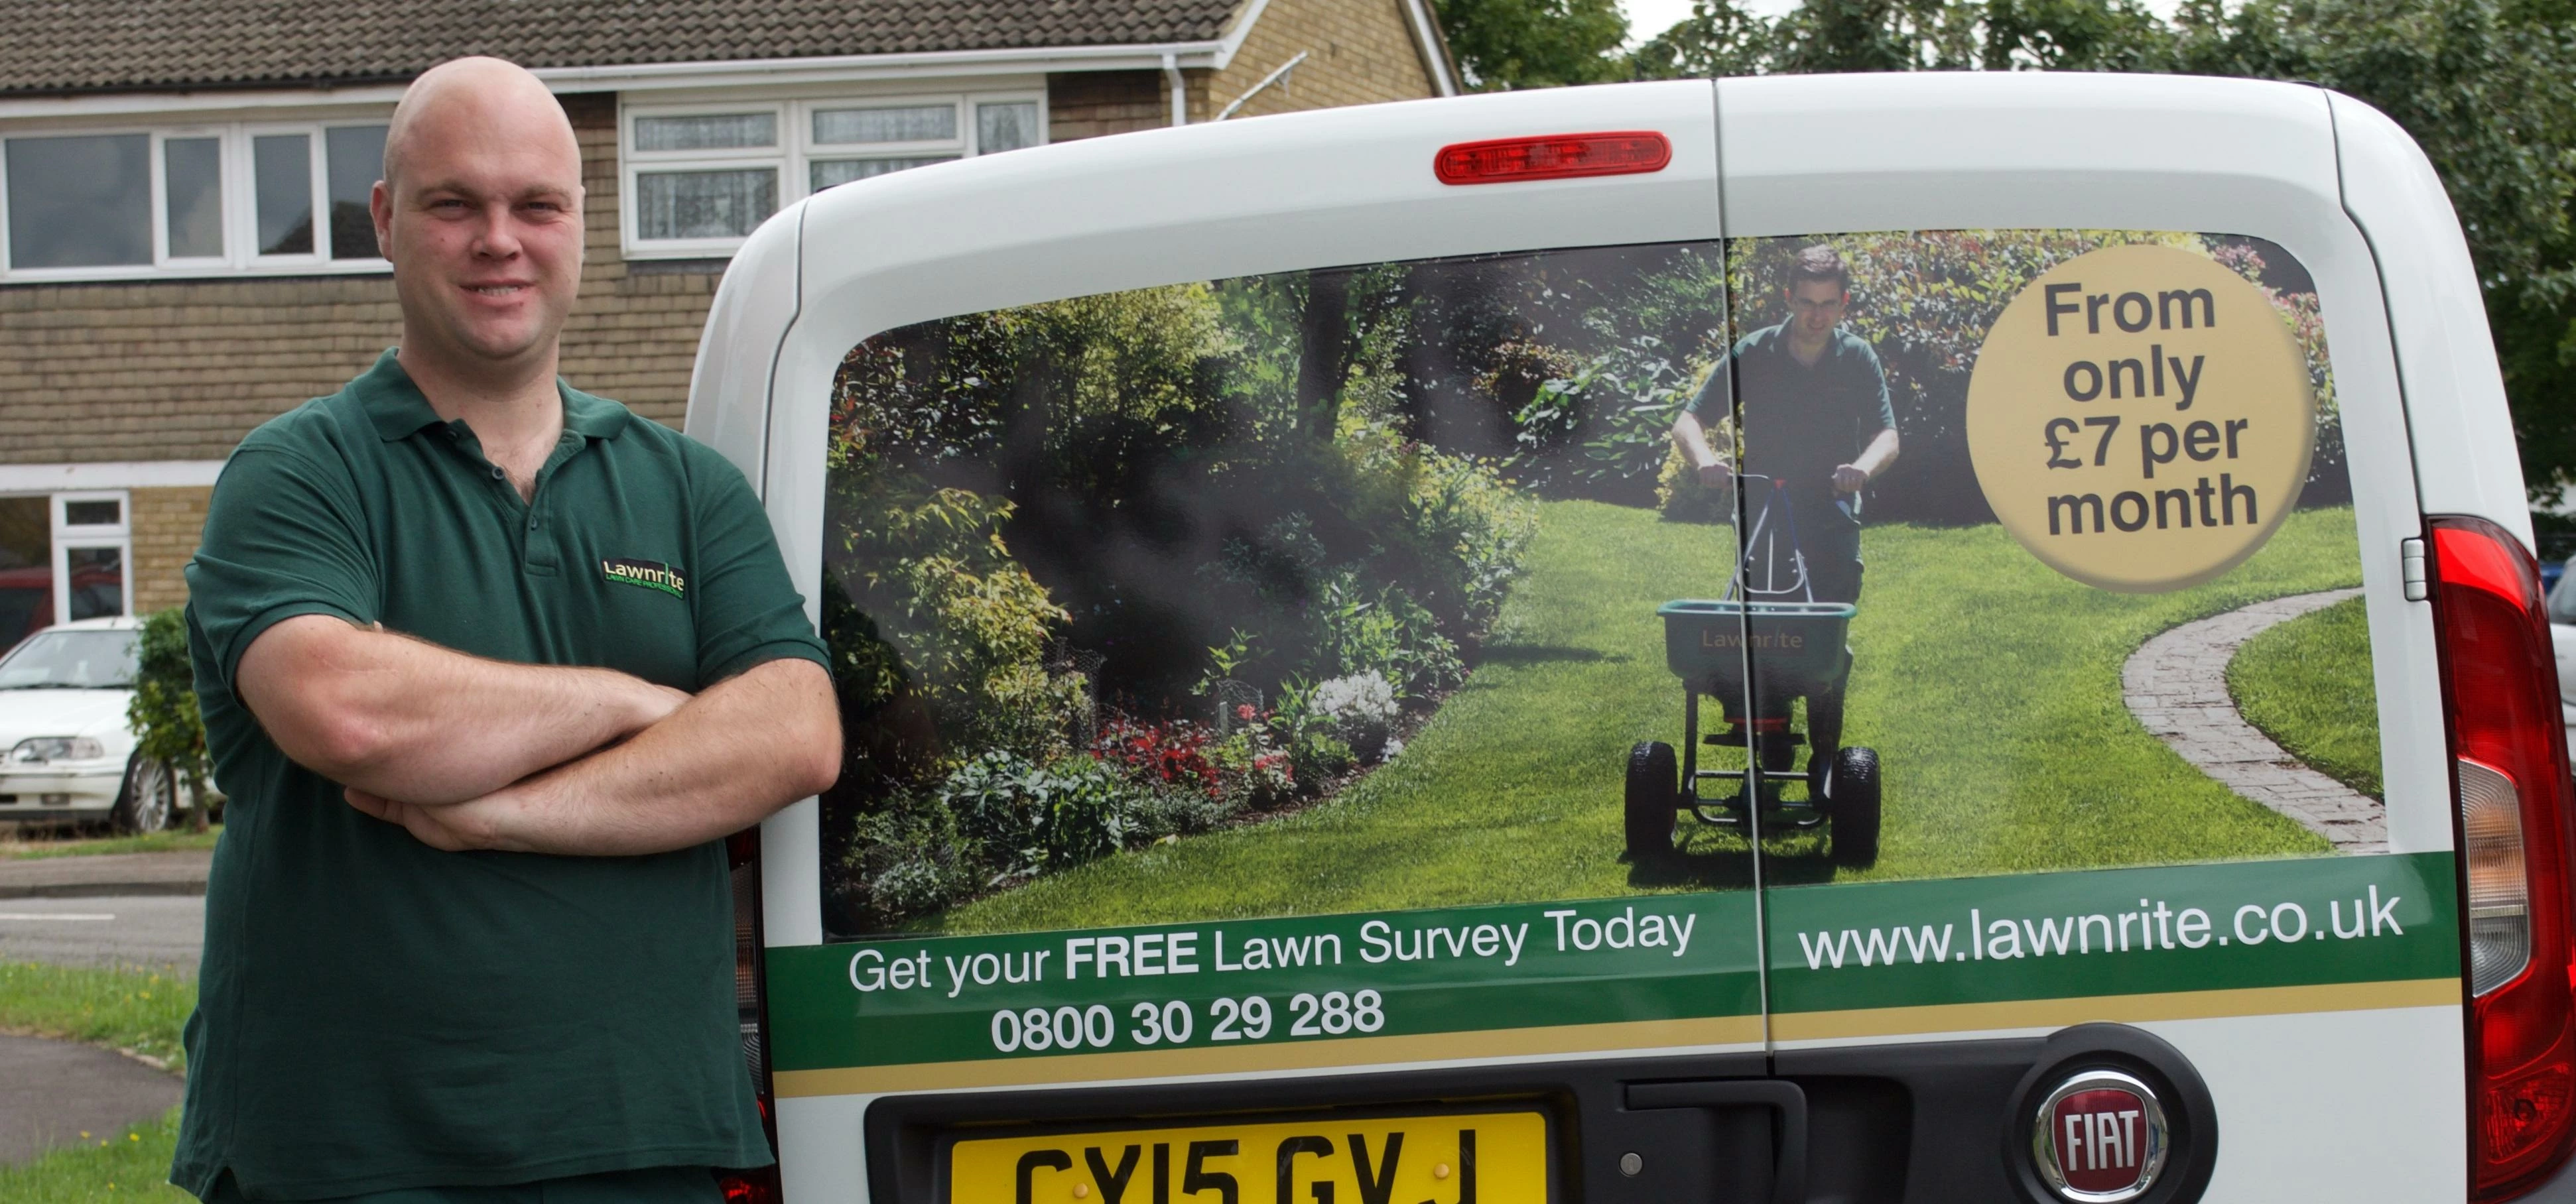 Jon Boon has opened the new Lawnrite franchise in Hitchin